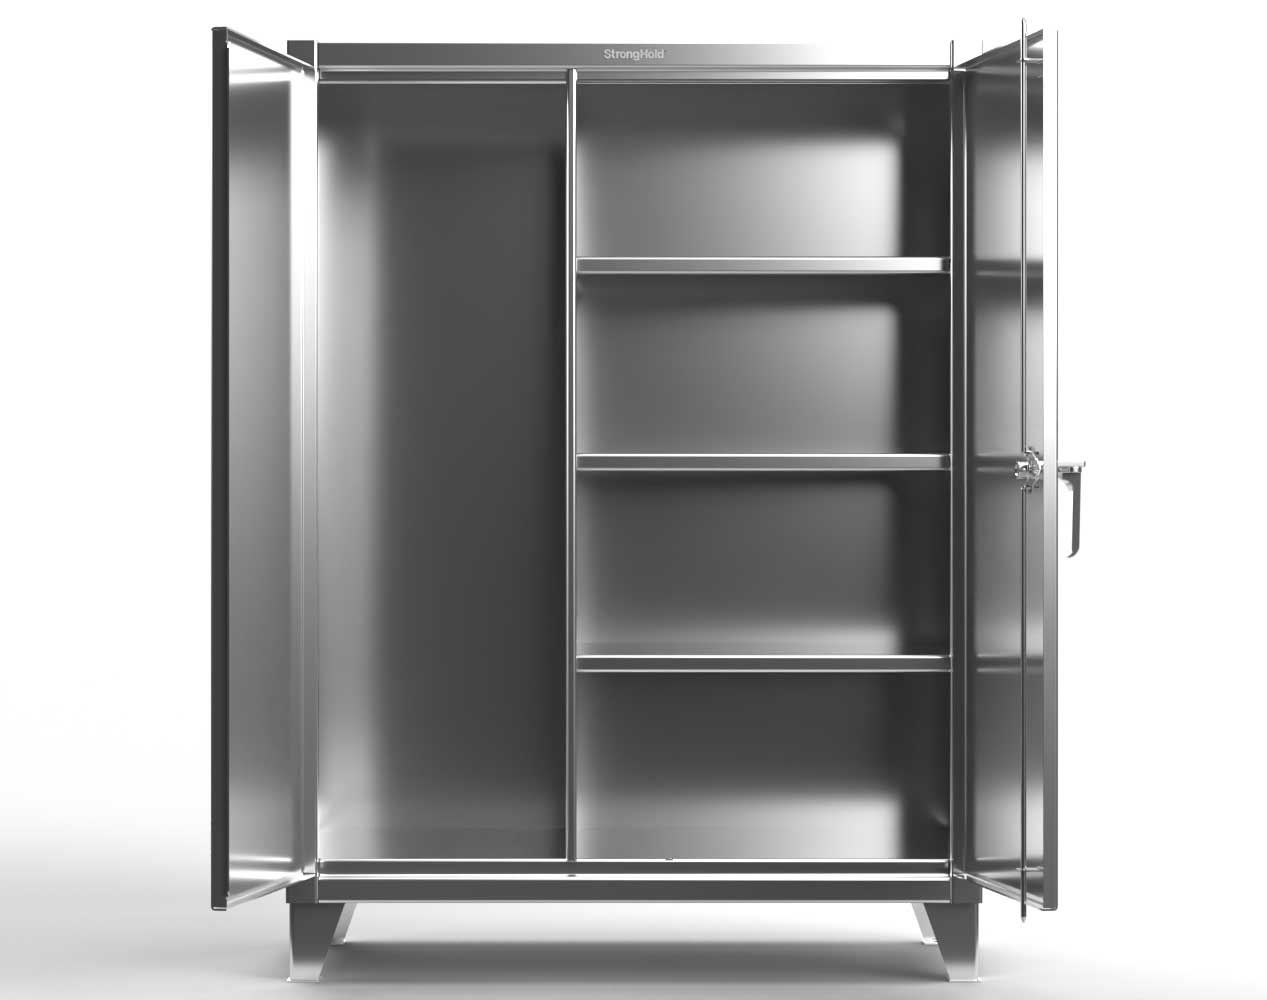 Extreme Duty 12 GA Stainless Steel Janitorial Cabinet with 3 Shelves - 48 In. W x 24 In. D x 66 In. H